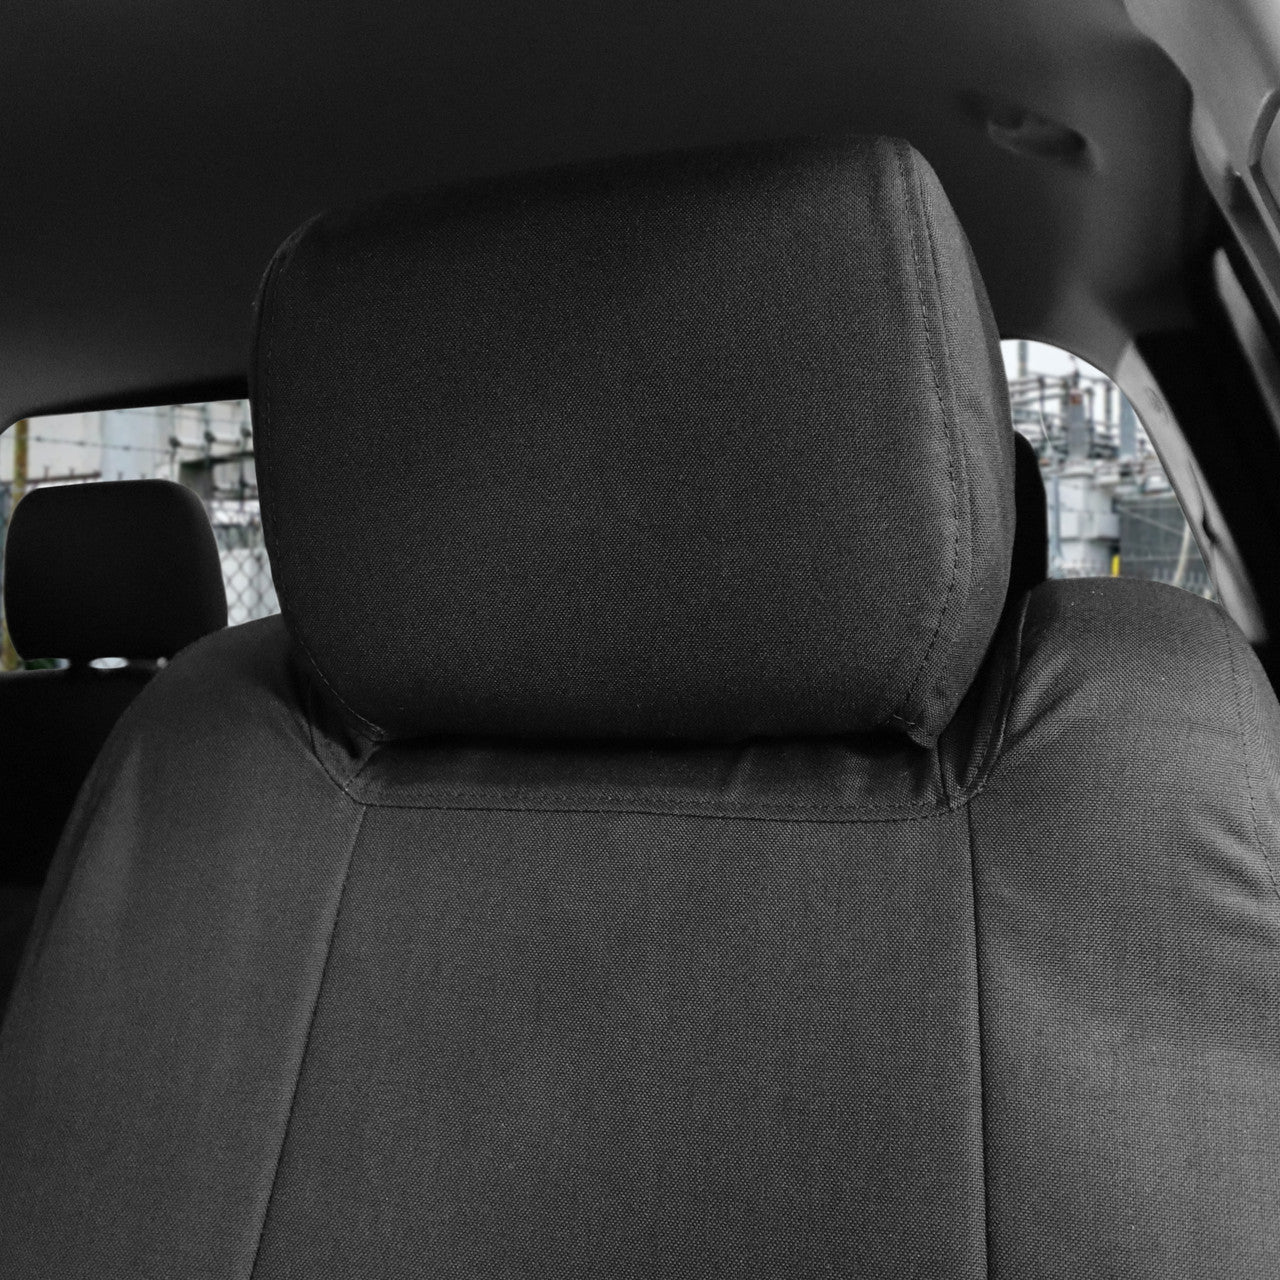 Front Antimicrobial Seat Covers for Toyota Tundra Trucks (W1721004)